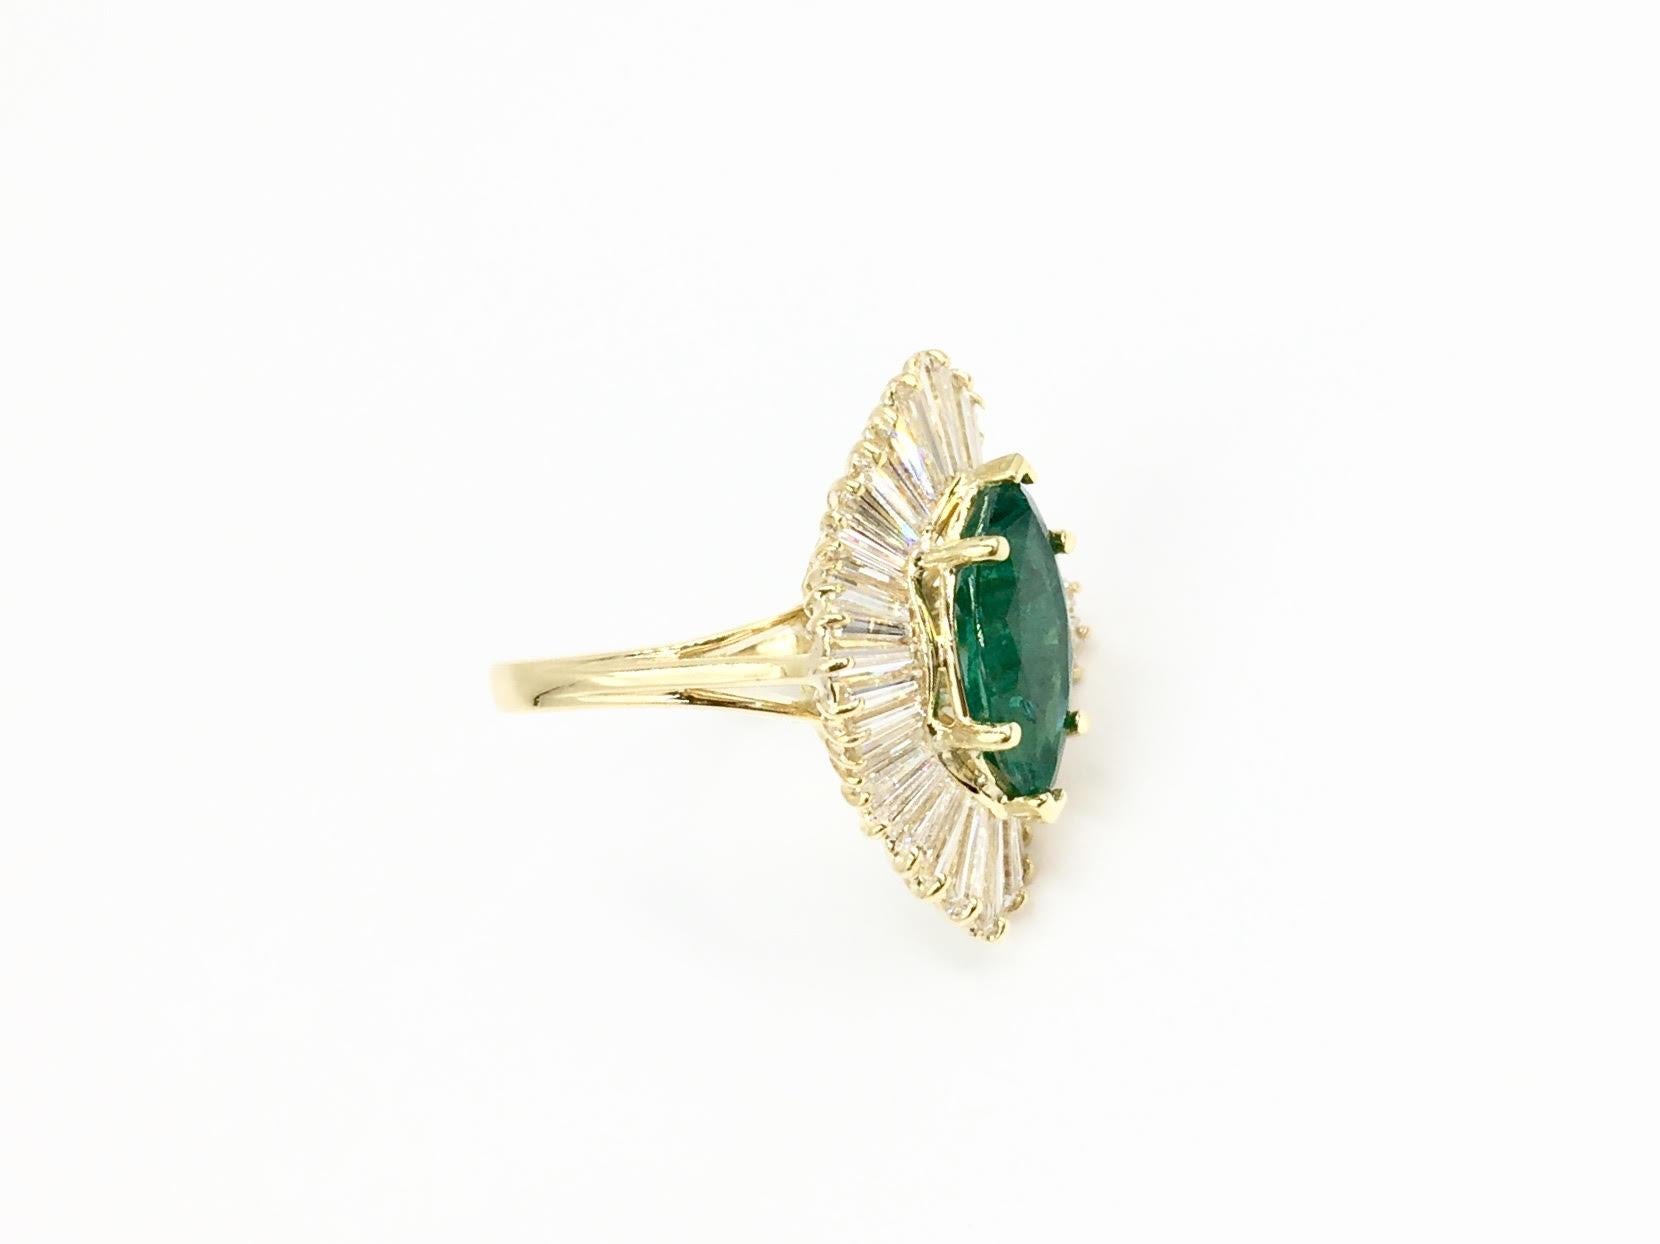 A classic vintage style 18 karat gold ballerina halo ring with generous amount of sparkle. This ballerina style ring features a very nice quality 2.70 carat marquise cut vivid emerald with medium transparency, excellent saturation and polish.